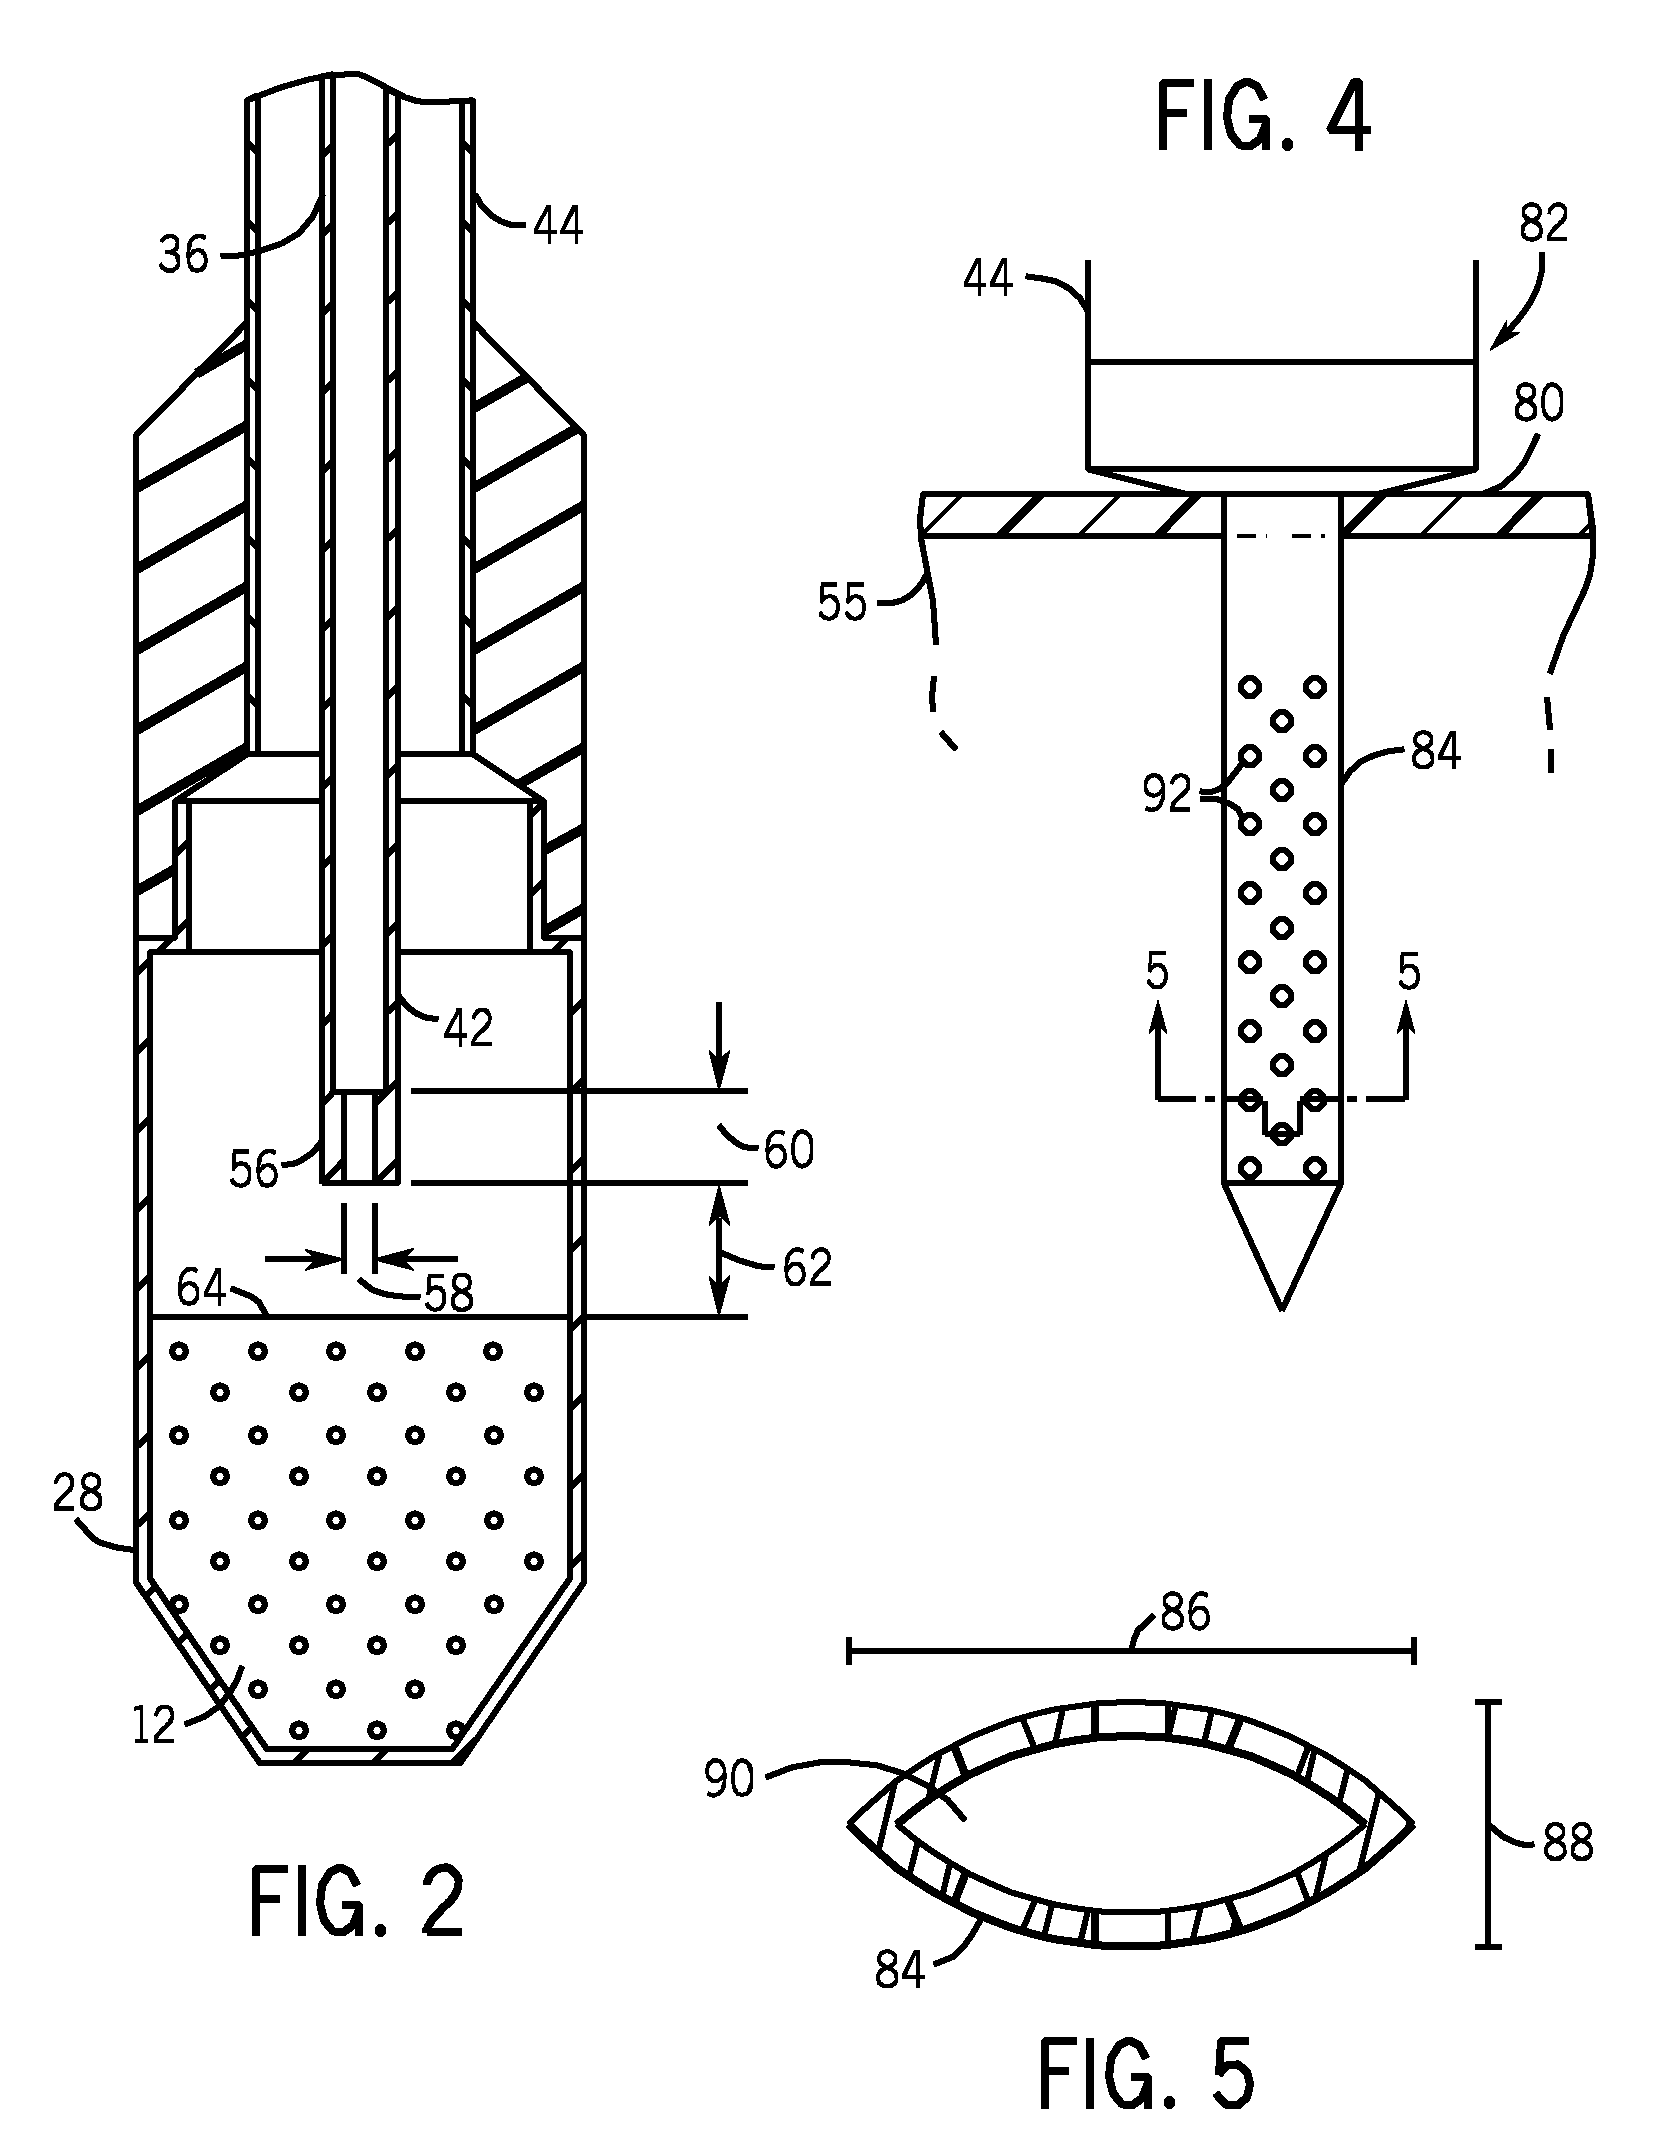 Fluid path system for dissolution and transport of a hyperpolarized material